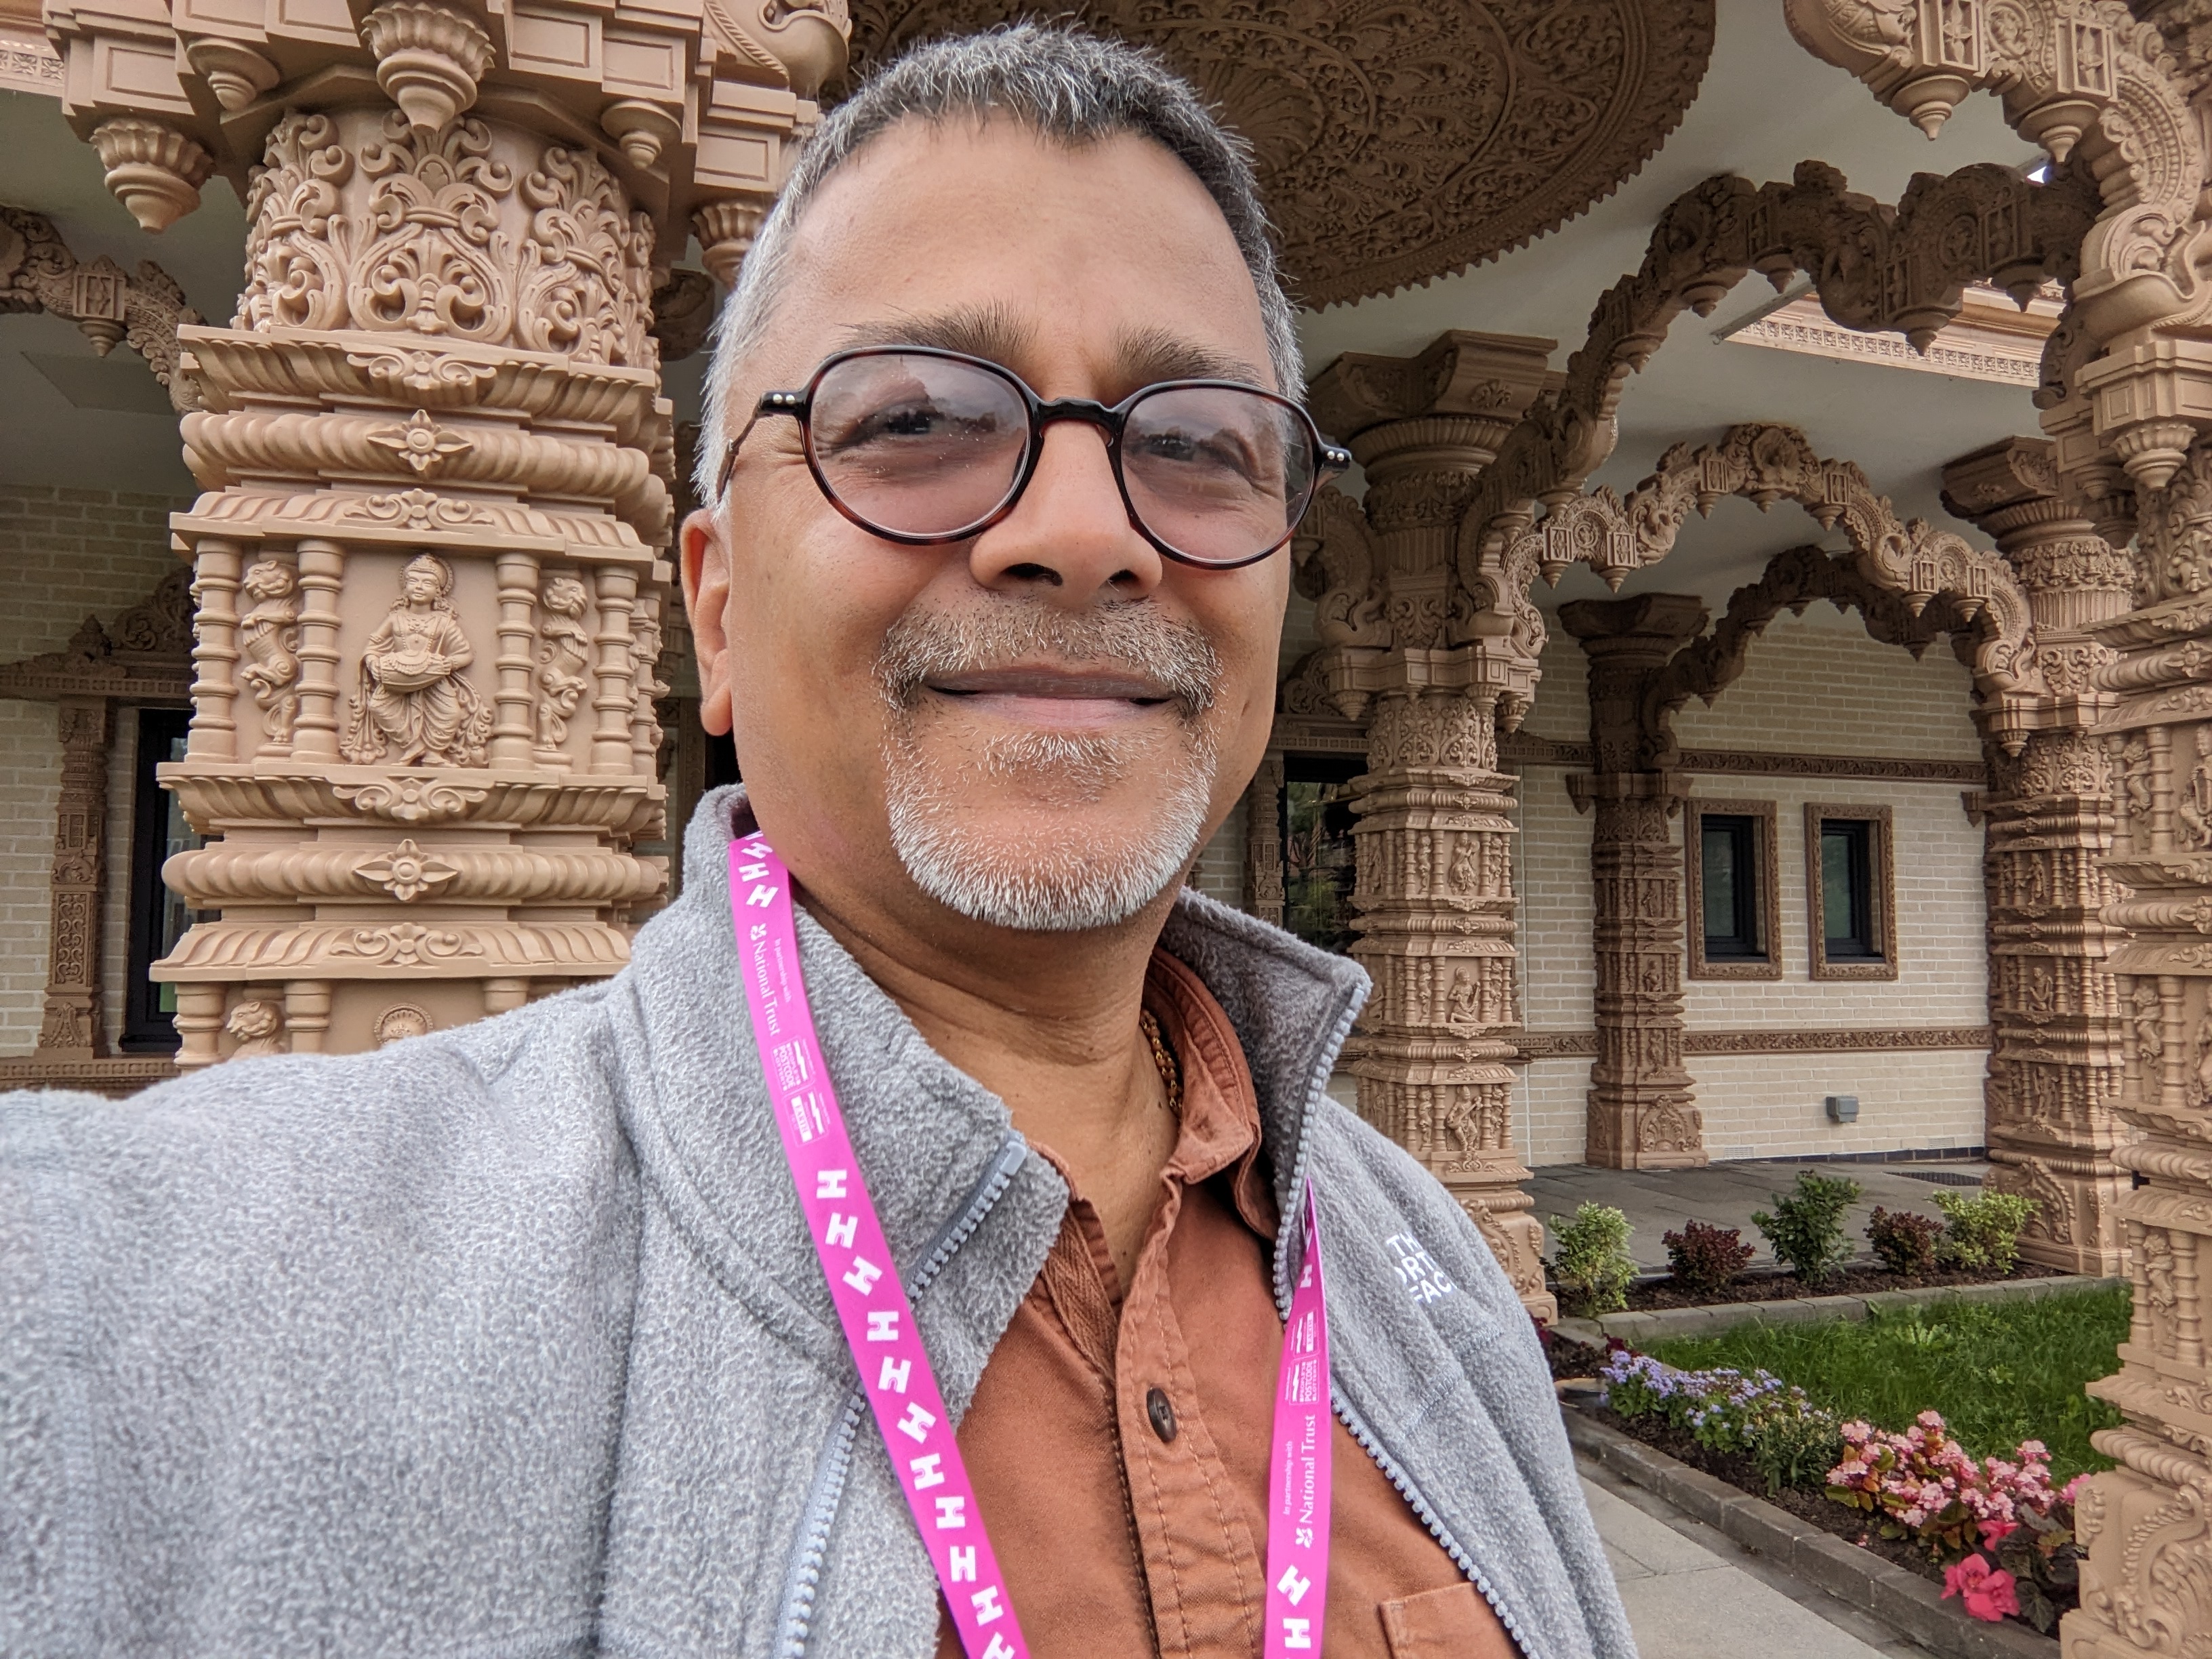 Man wearing glasses and a pink lanyard in front of ornate colonnade 